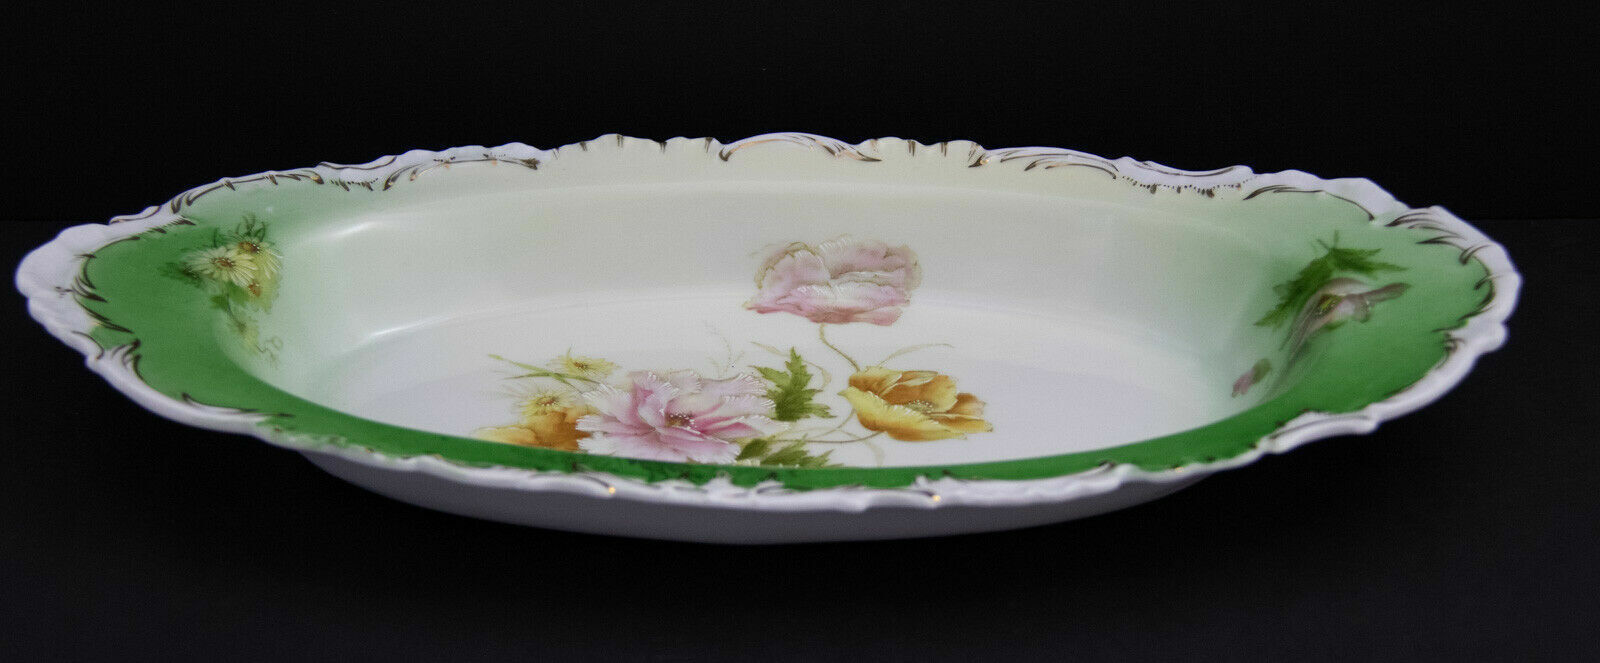 Antique PT Germany Relish Celery Dish Hand Painted California Rose Flower